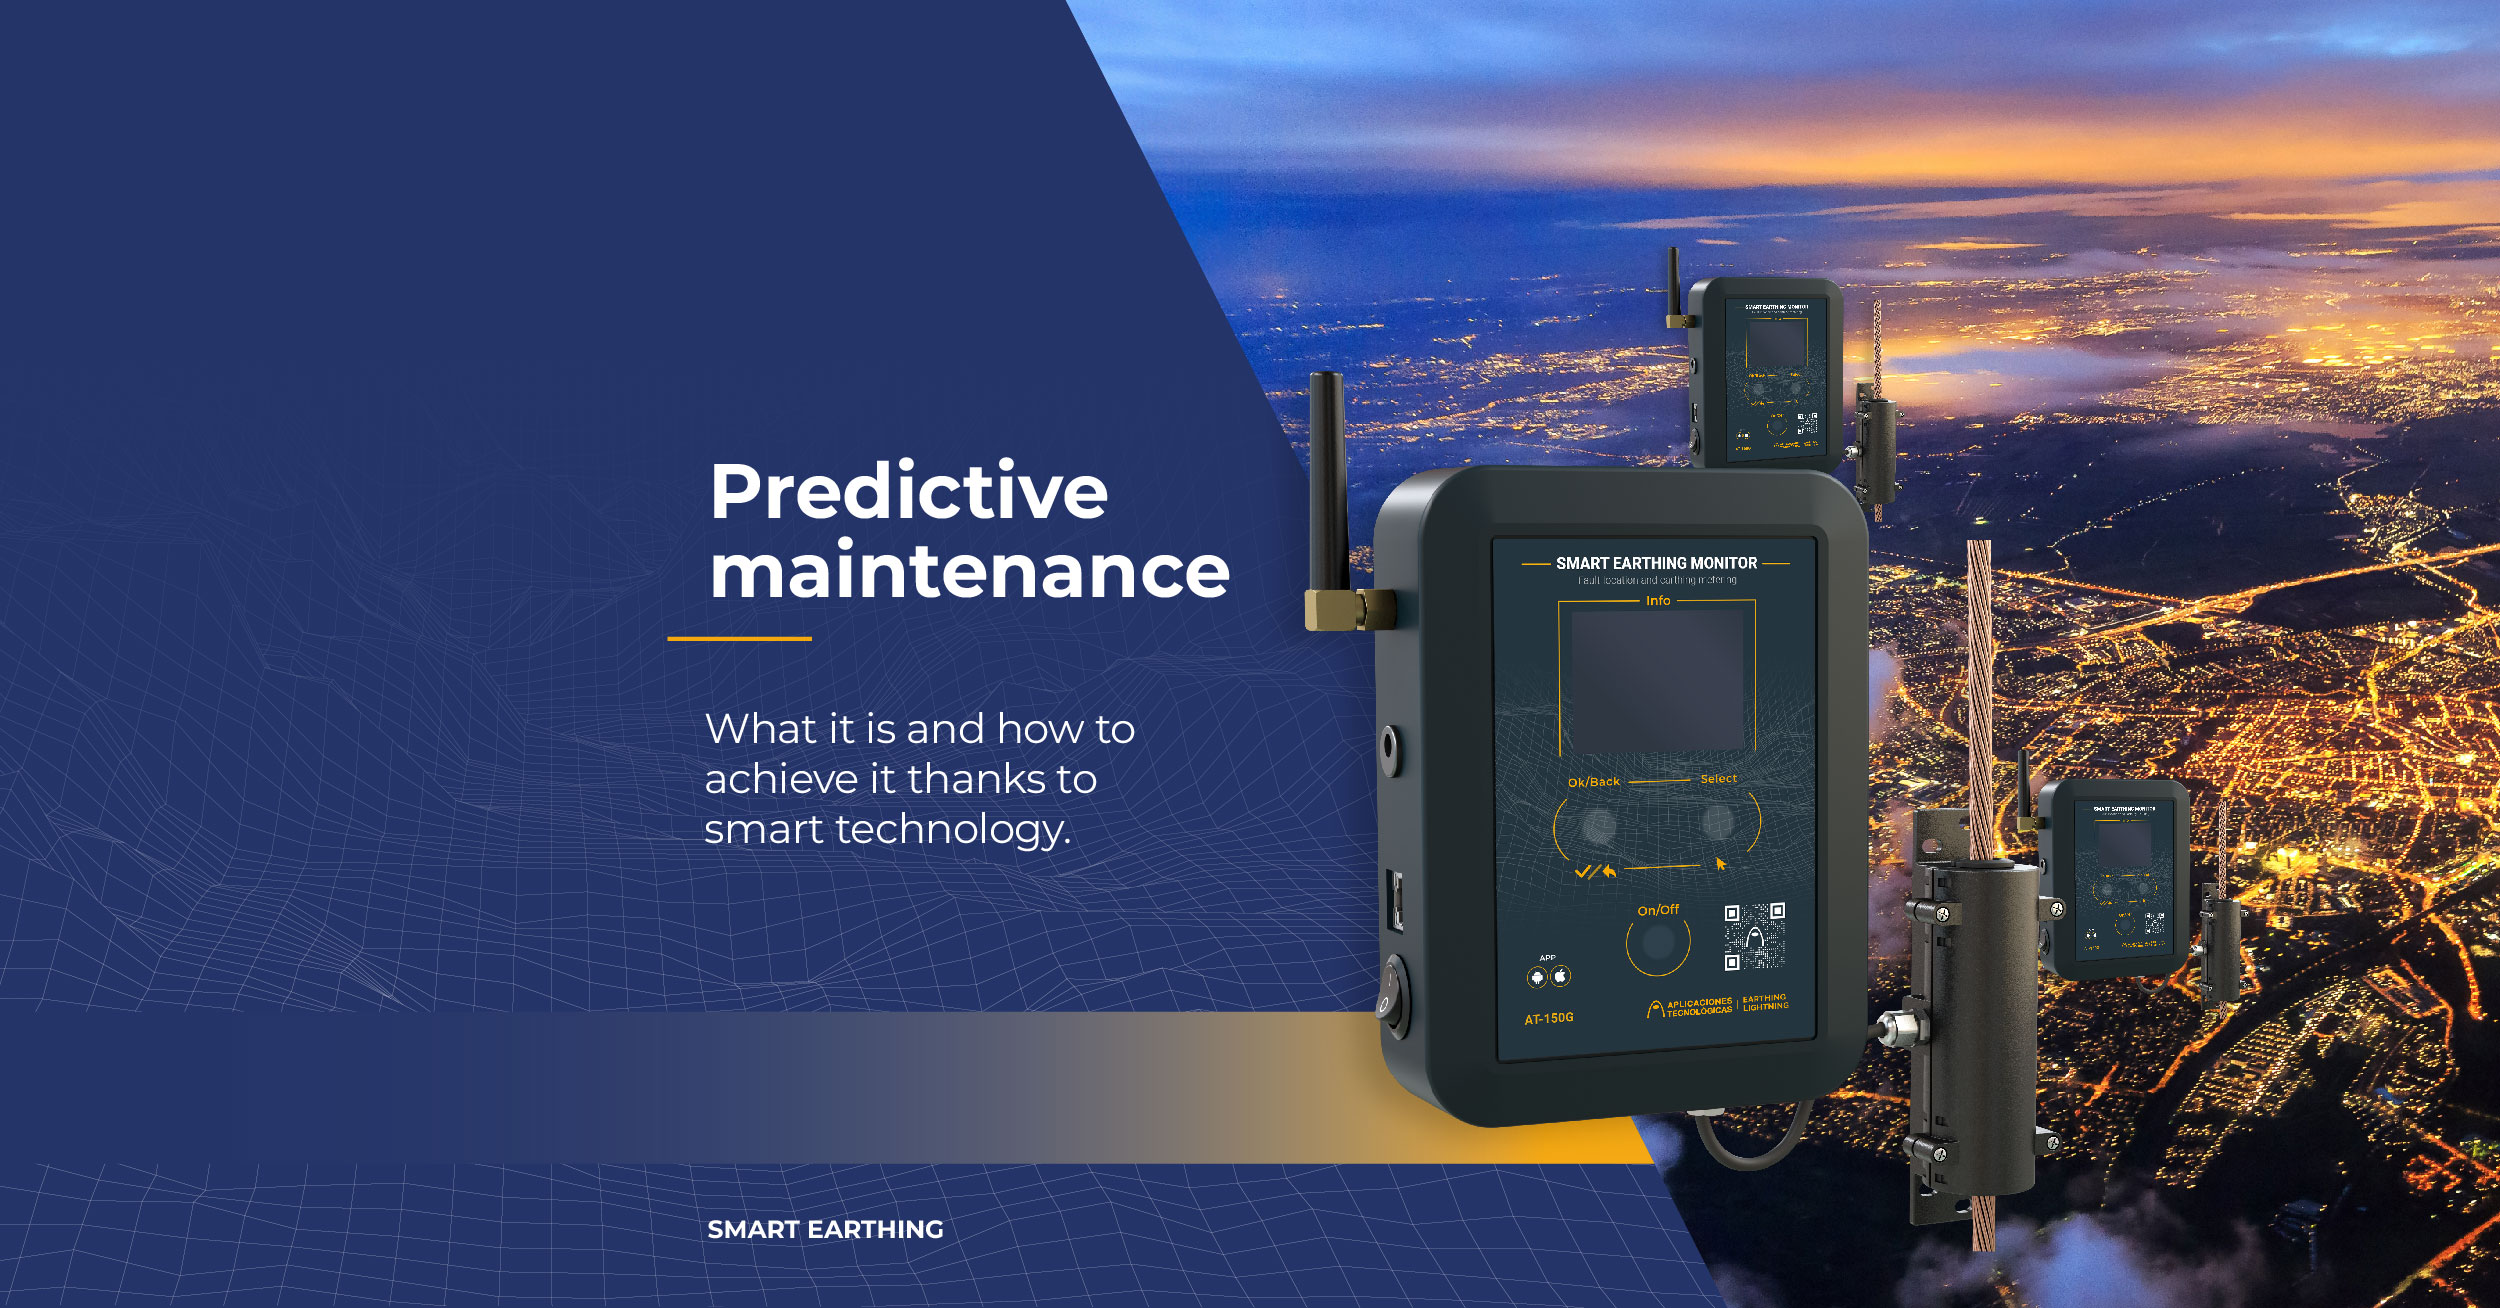 predictive-maintenance-what-it-is-and-how-to-achieve-it-with-smart-technology